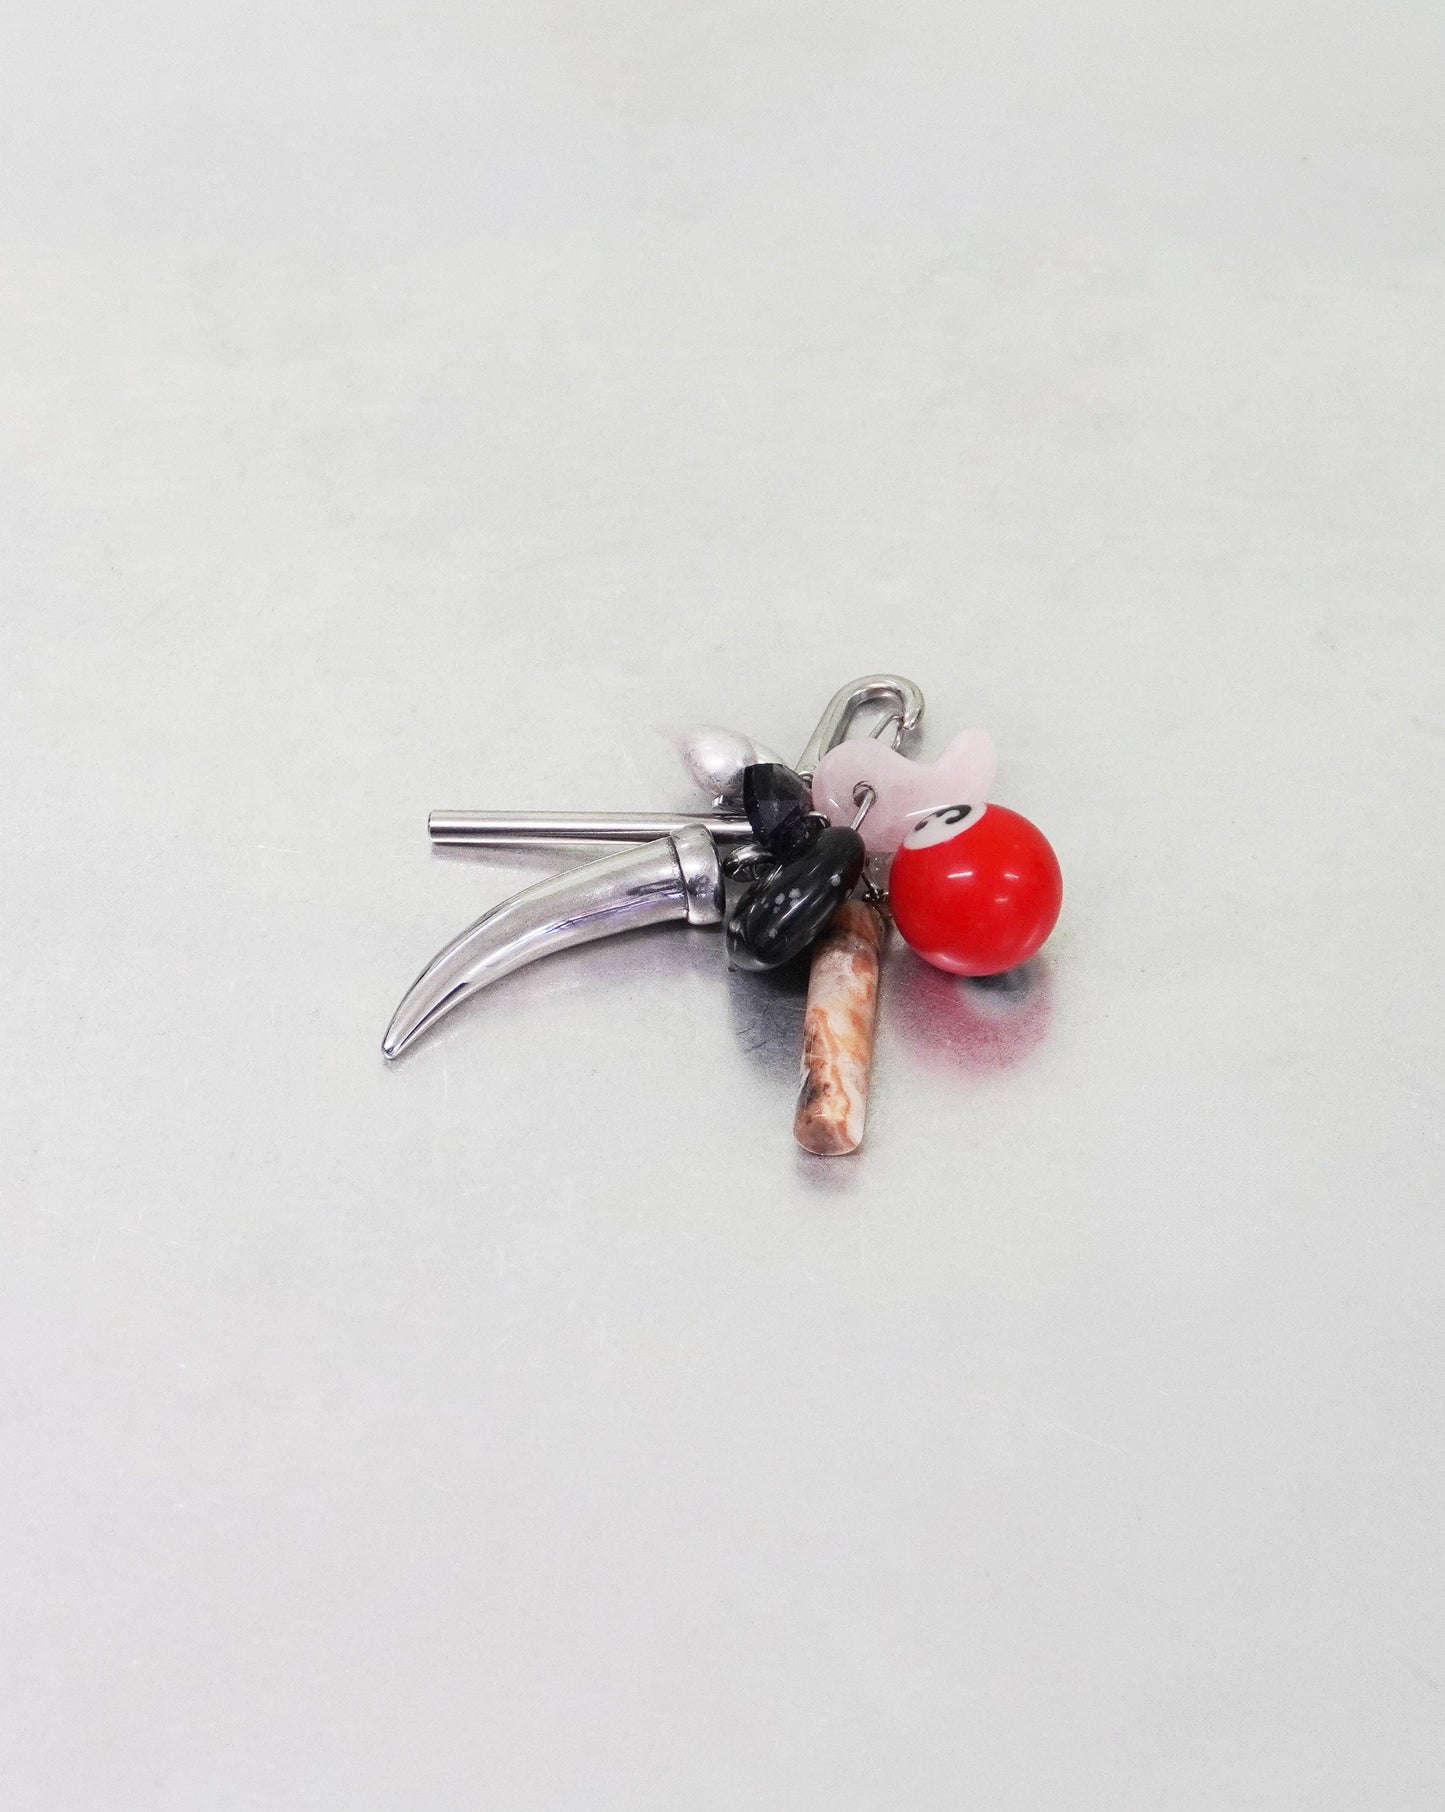 Marland Backus - Red Keychain with Black Flower